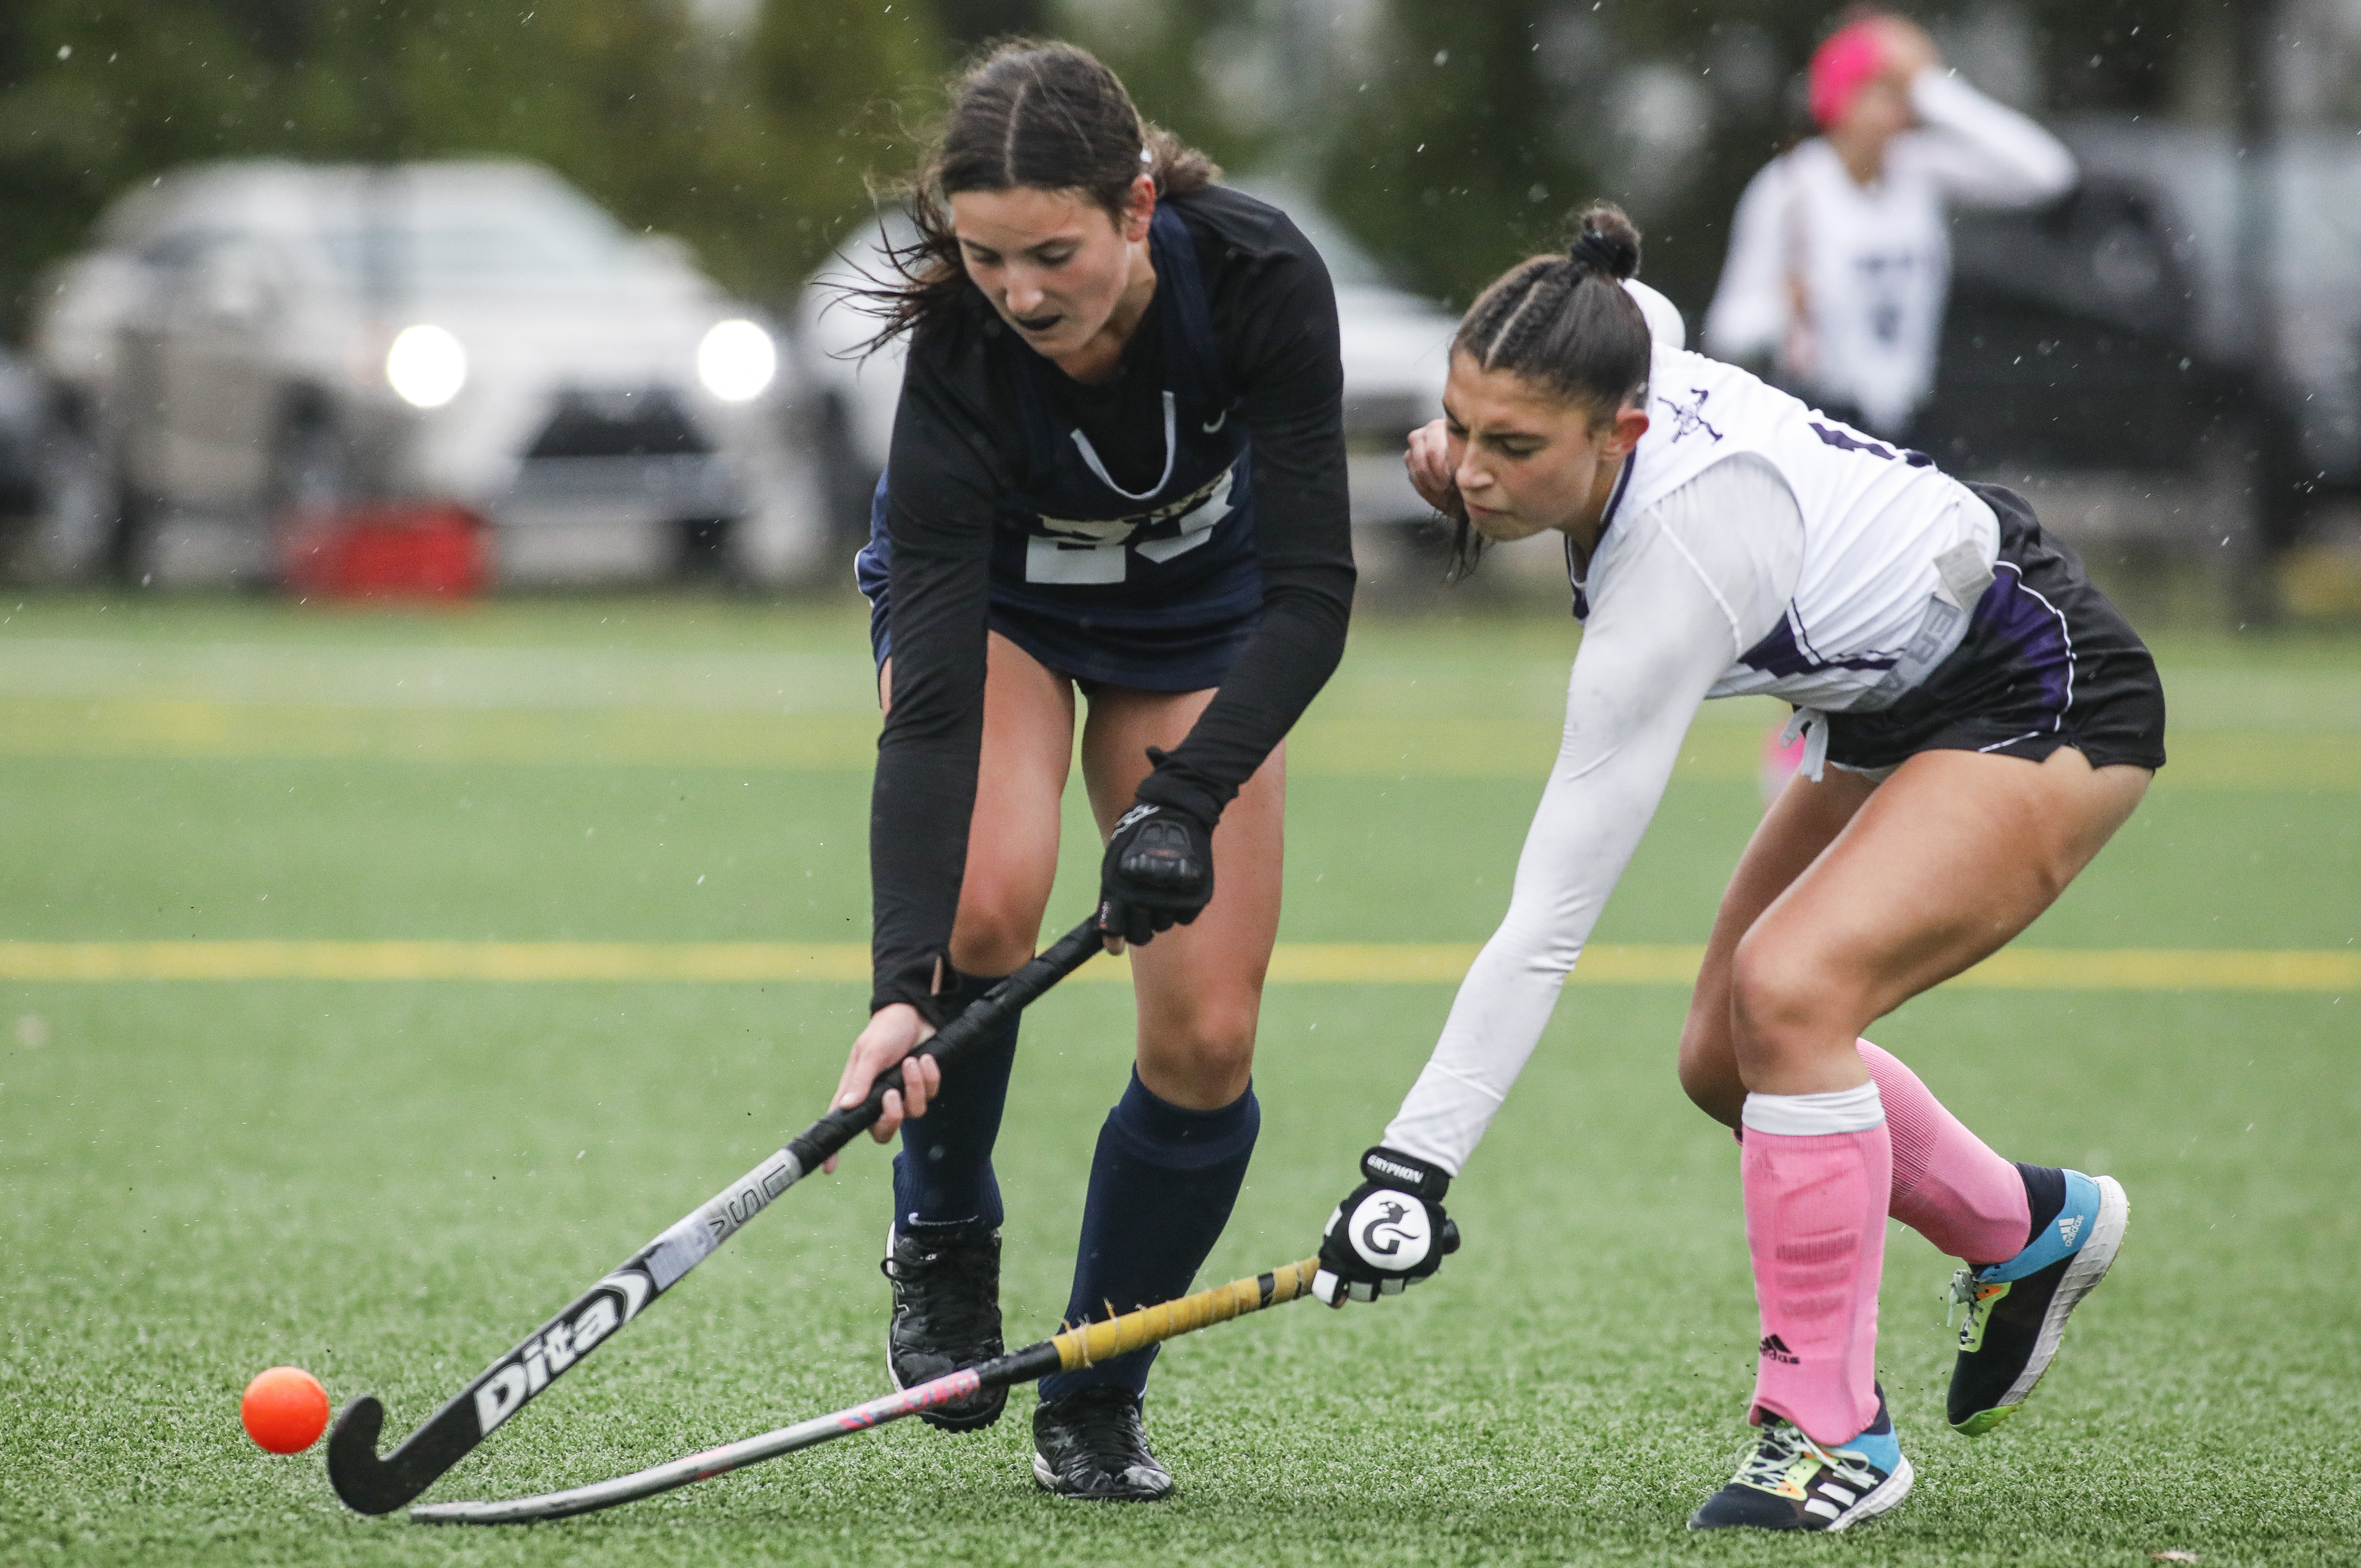 Field hockey coaching: How to move effectively as a goalkeeper - The Hockey  Paper